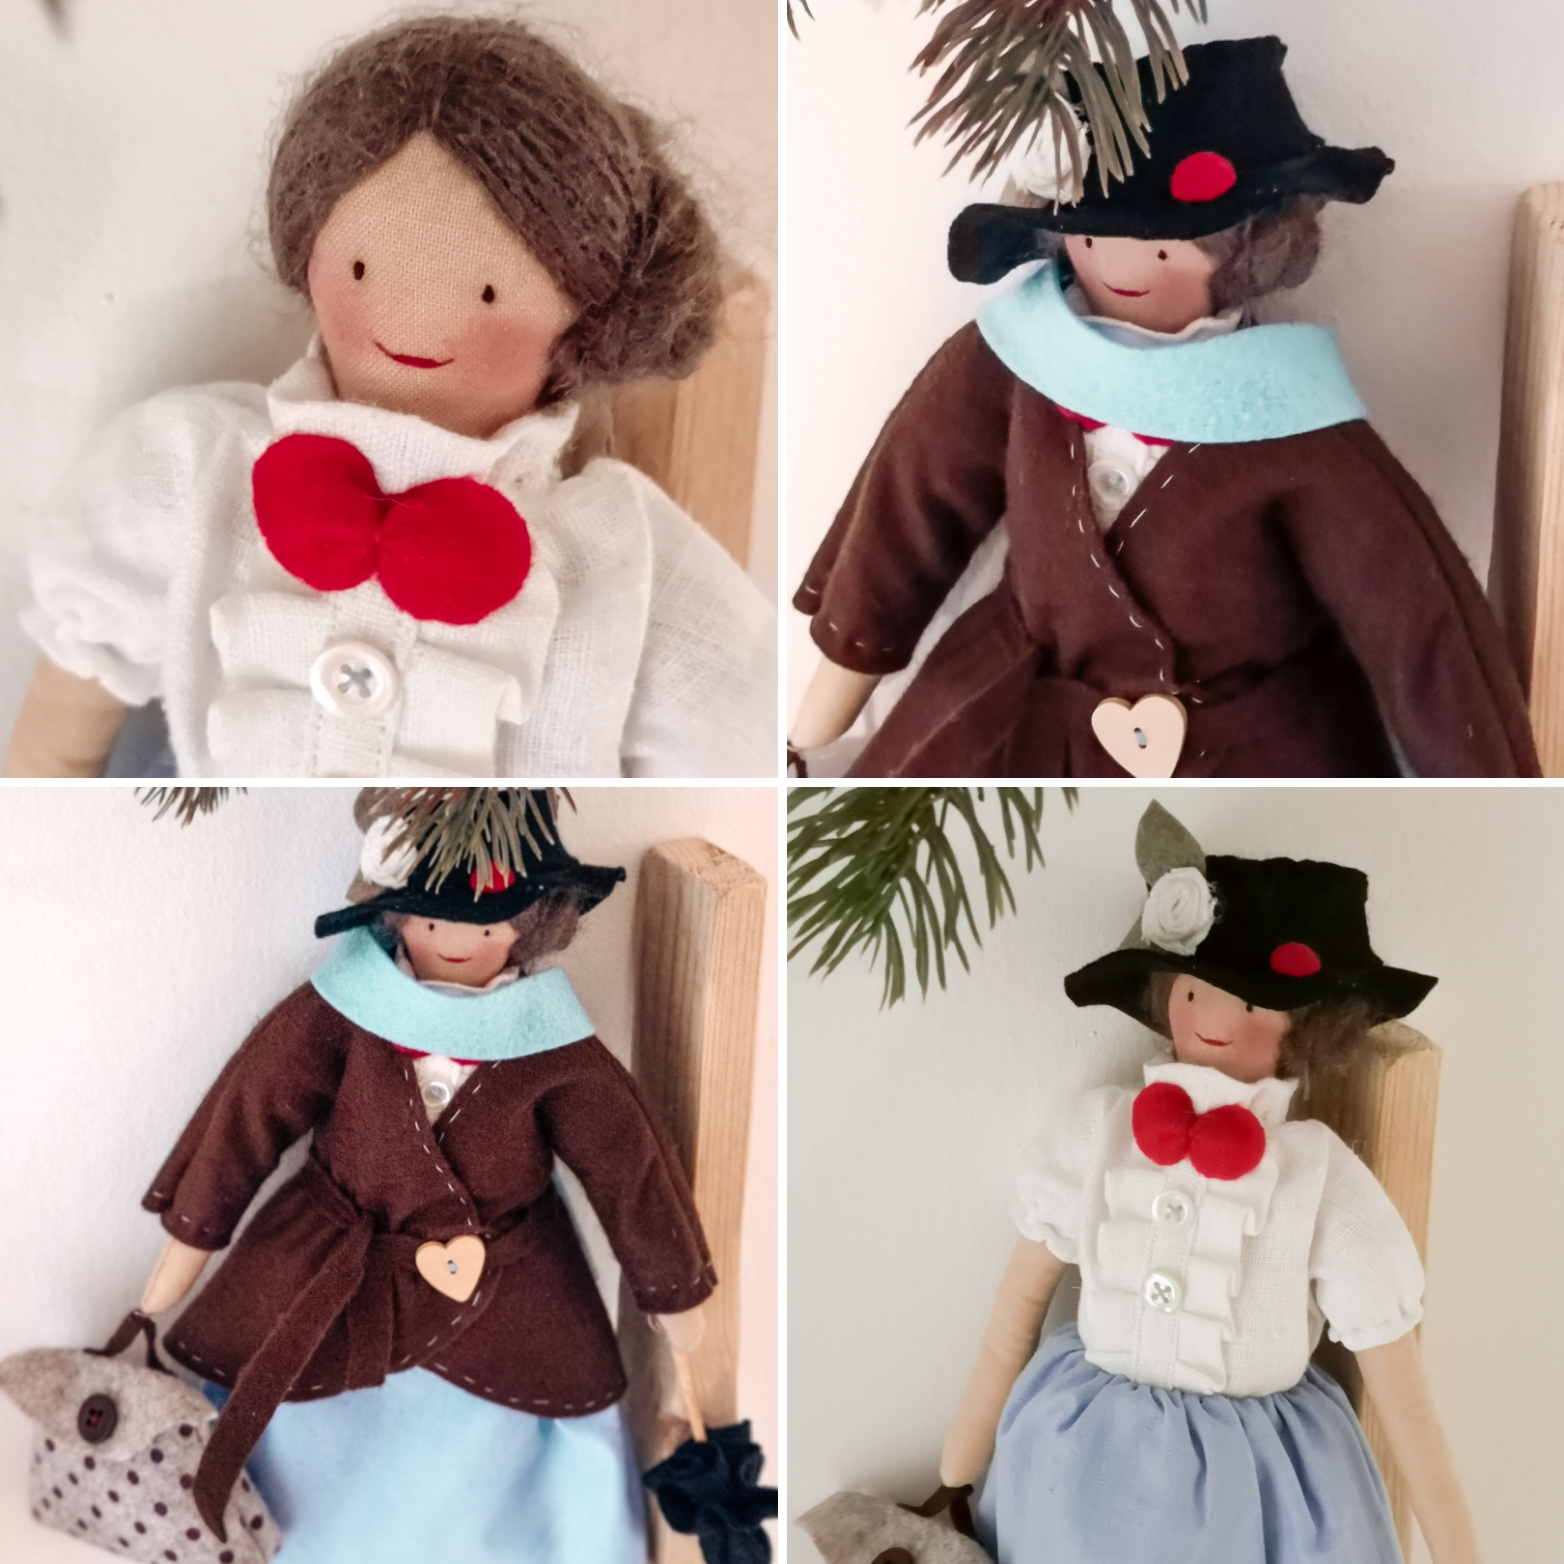 Laura country style: Mary Poppins {Pdf sewing pattern file}